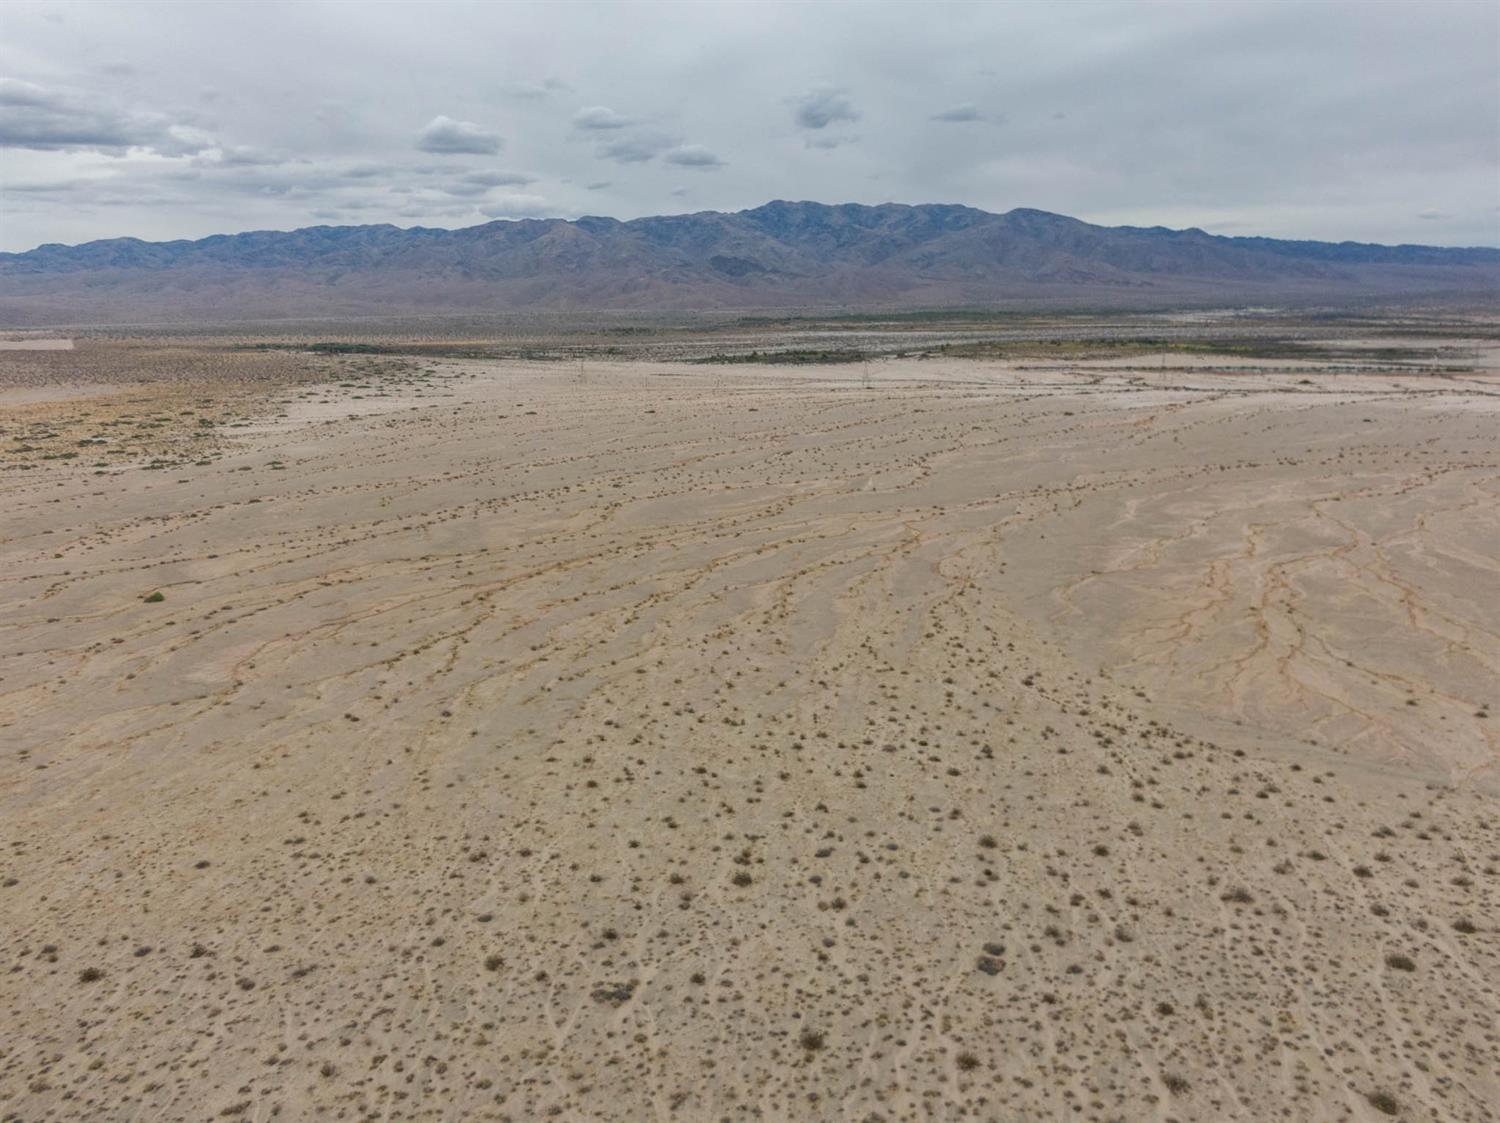 120 acres in the Coachella Valley area, close to the Salton Sea.  Perfect for a Solar farm.  At one time the owner cut the property up into 17 parcels, no longer a viable.